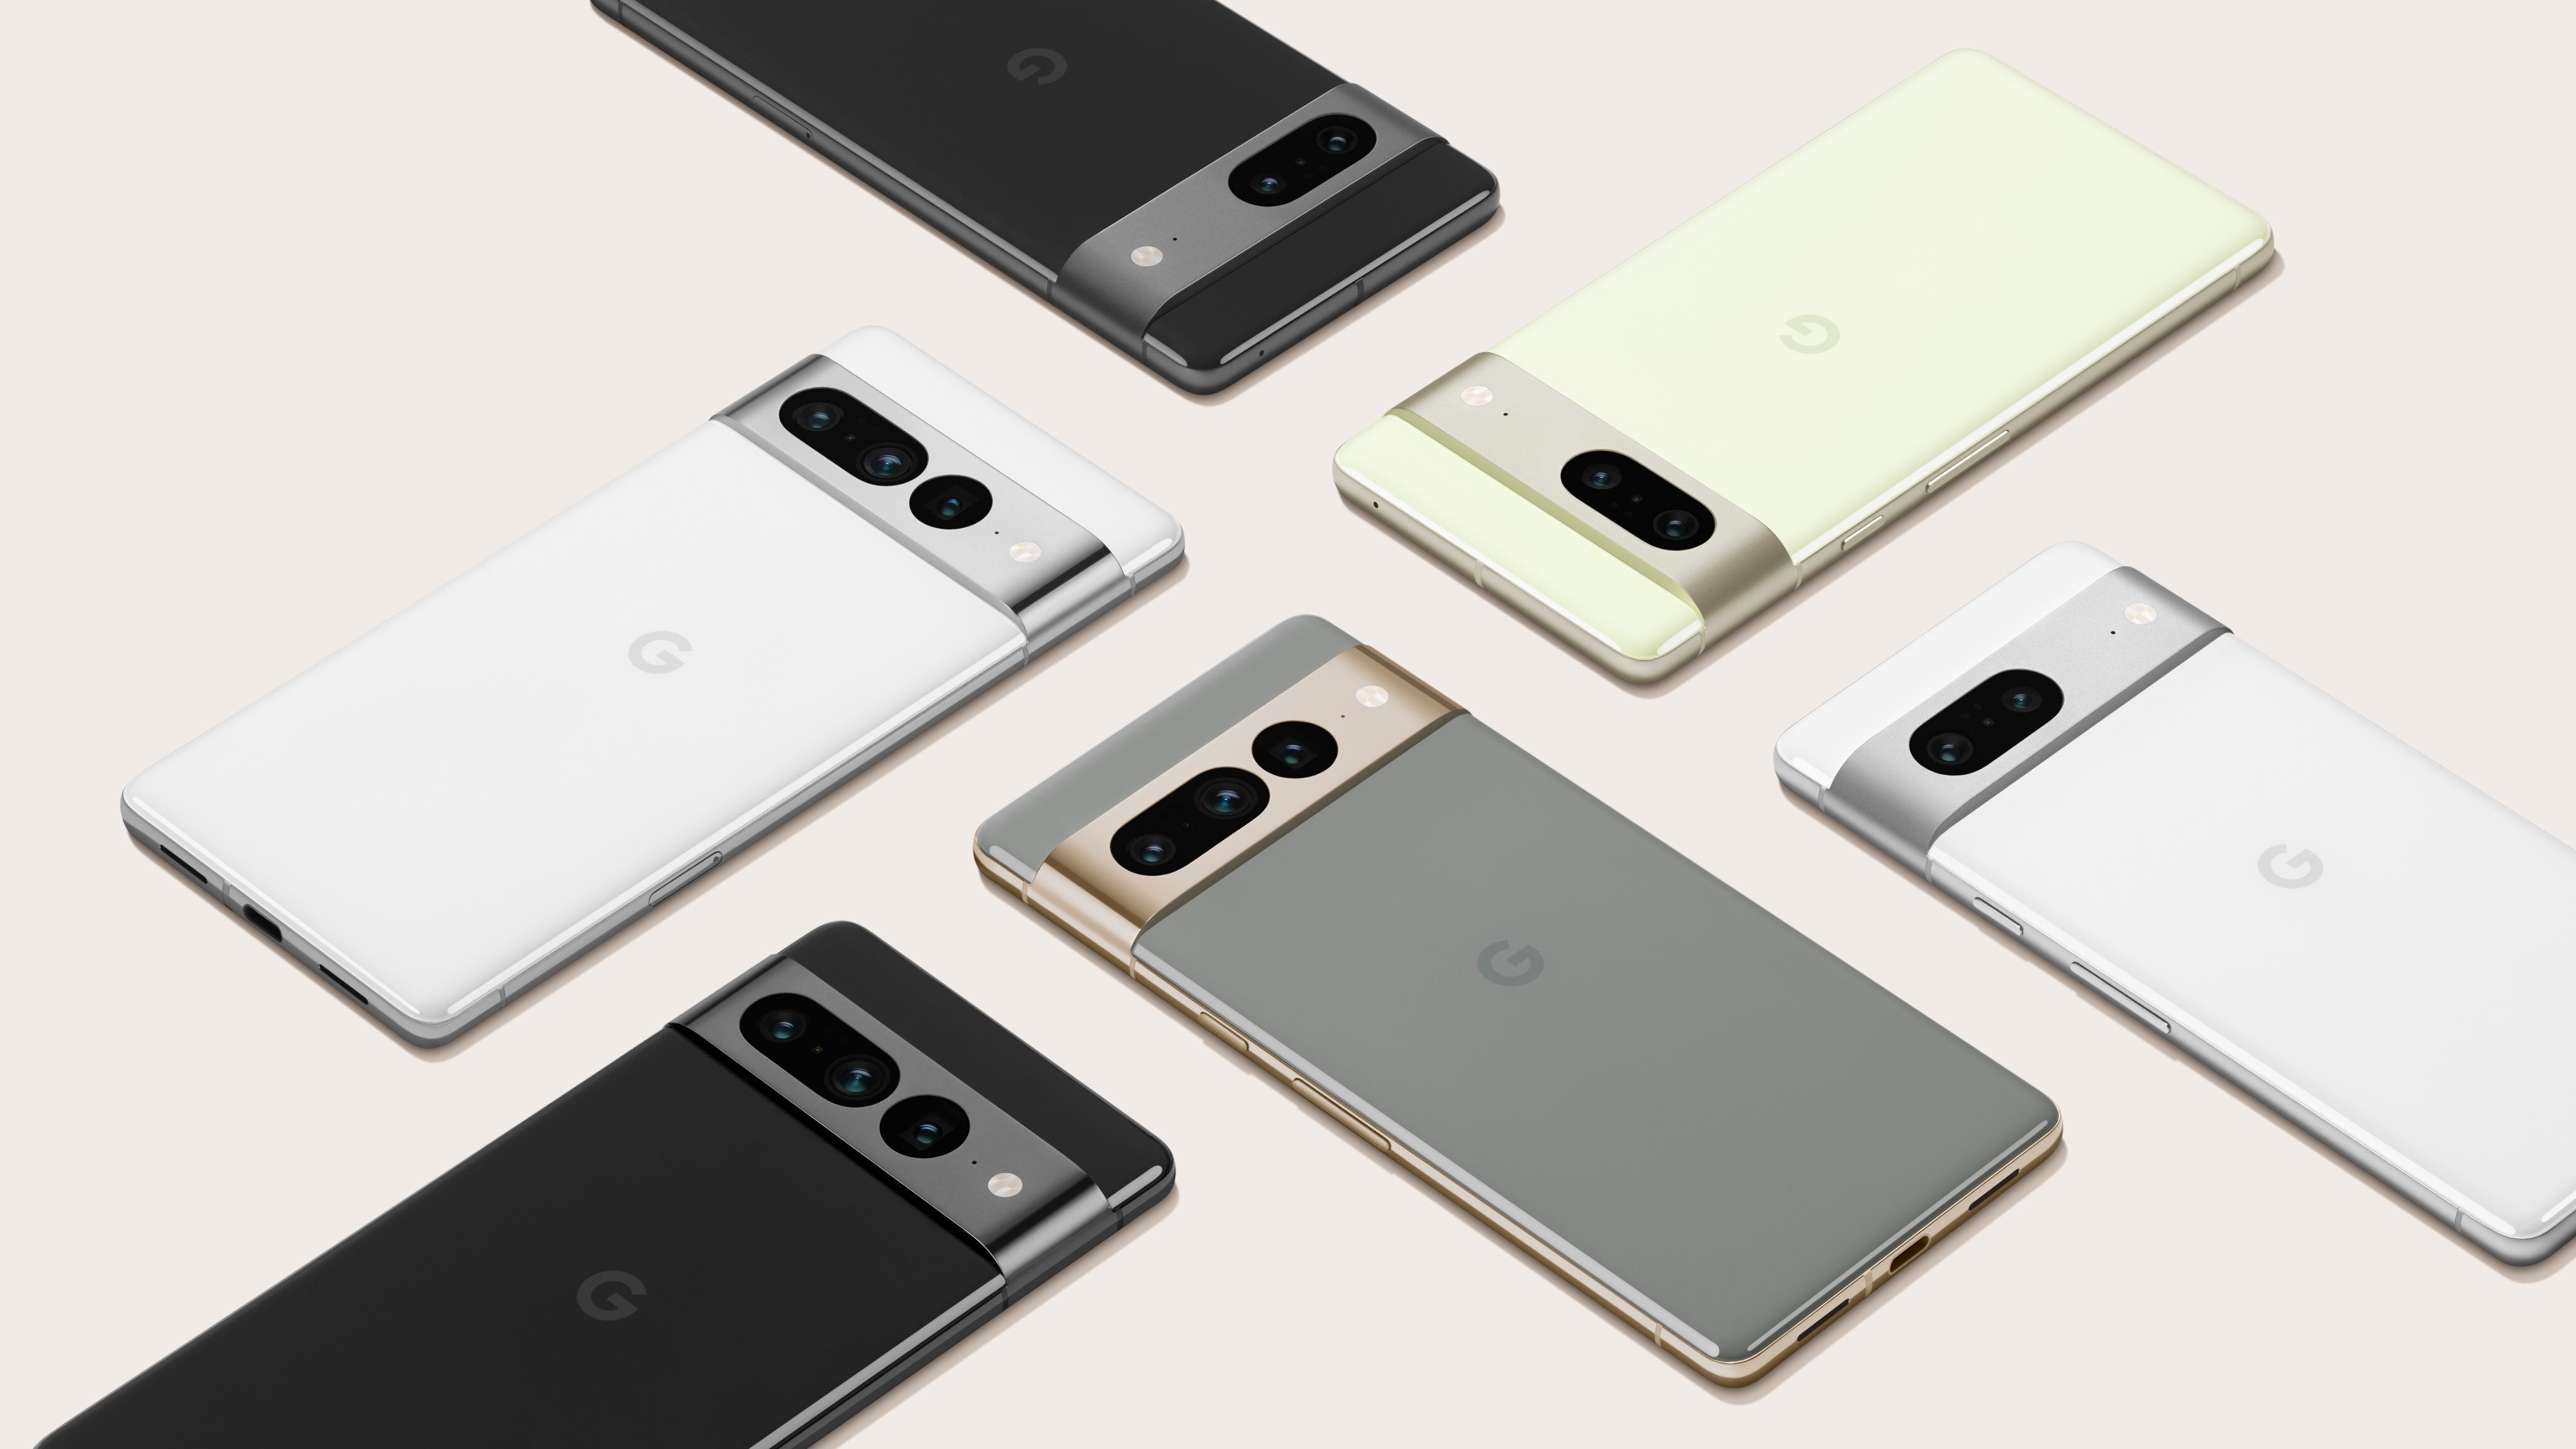 The list is long... - Pixel 7 to show if Google takes flagship phones seriously: Chasing The Big Bugs or The Big Bucks